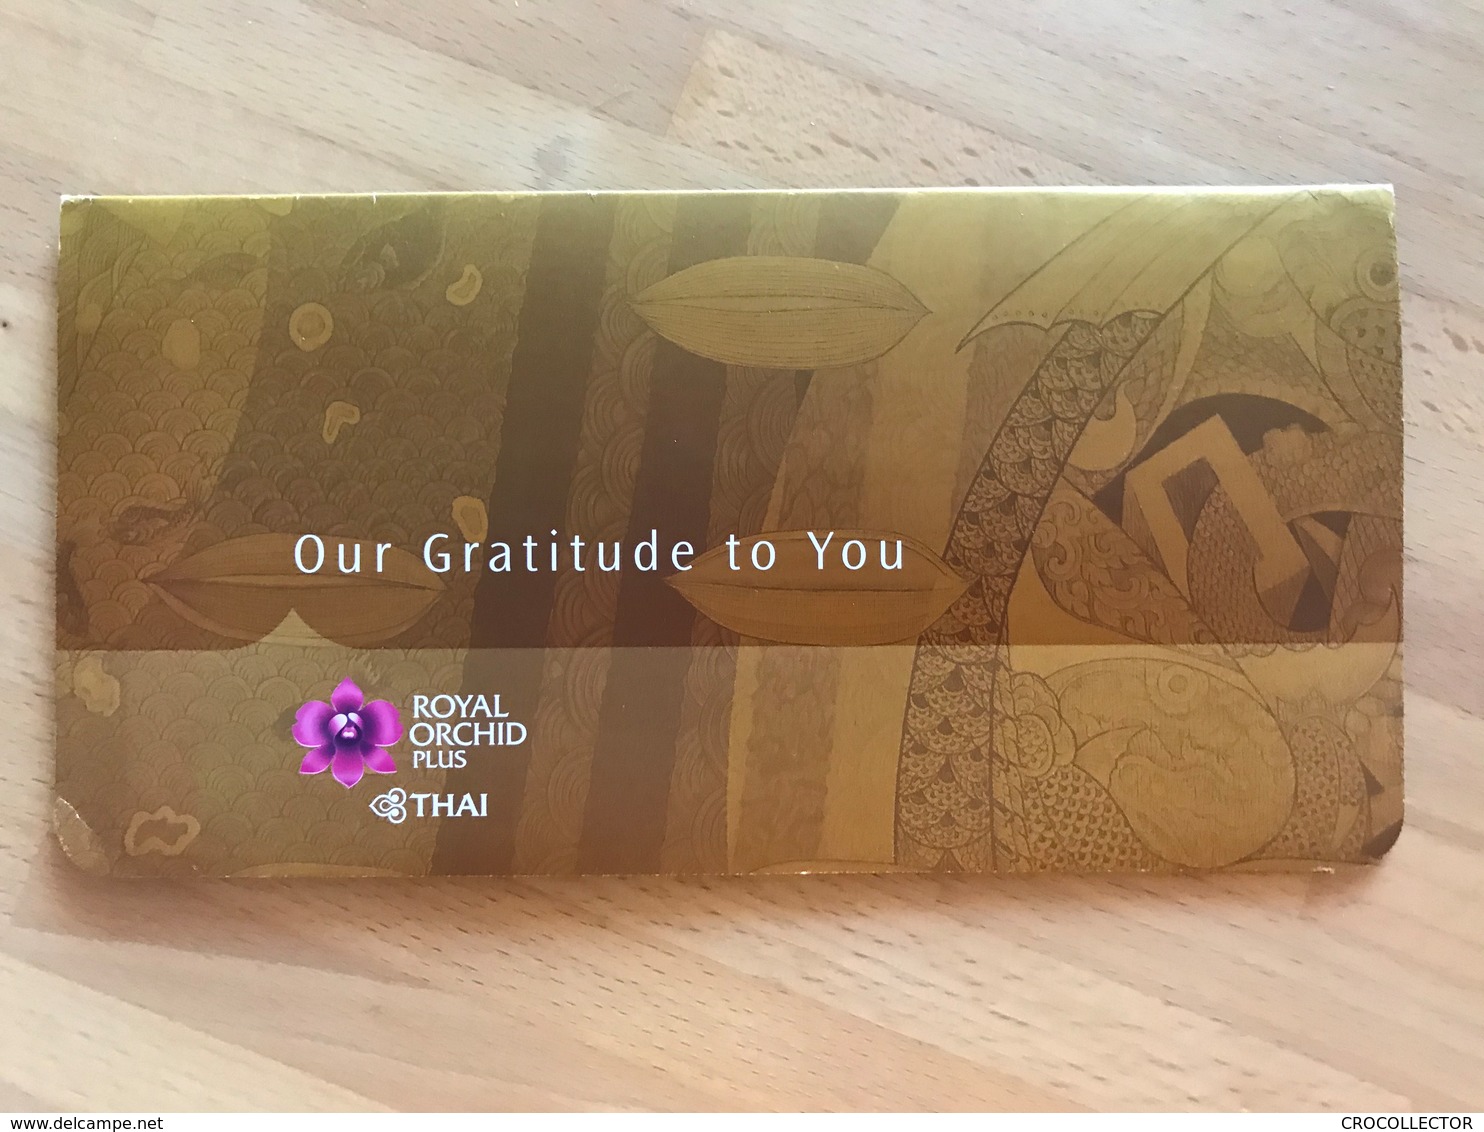 THAI AIRWAYS BIRTHDAY UPGRADE VOUCHER AWARD FOR FREQUENT FLYER ROYAL ORCHID PLUS GOLD GOLD CARD HOLDERS - Giveaways